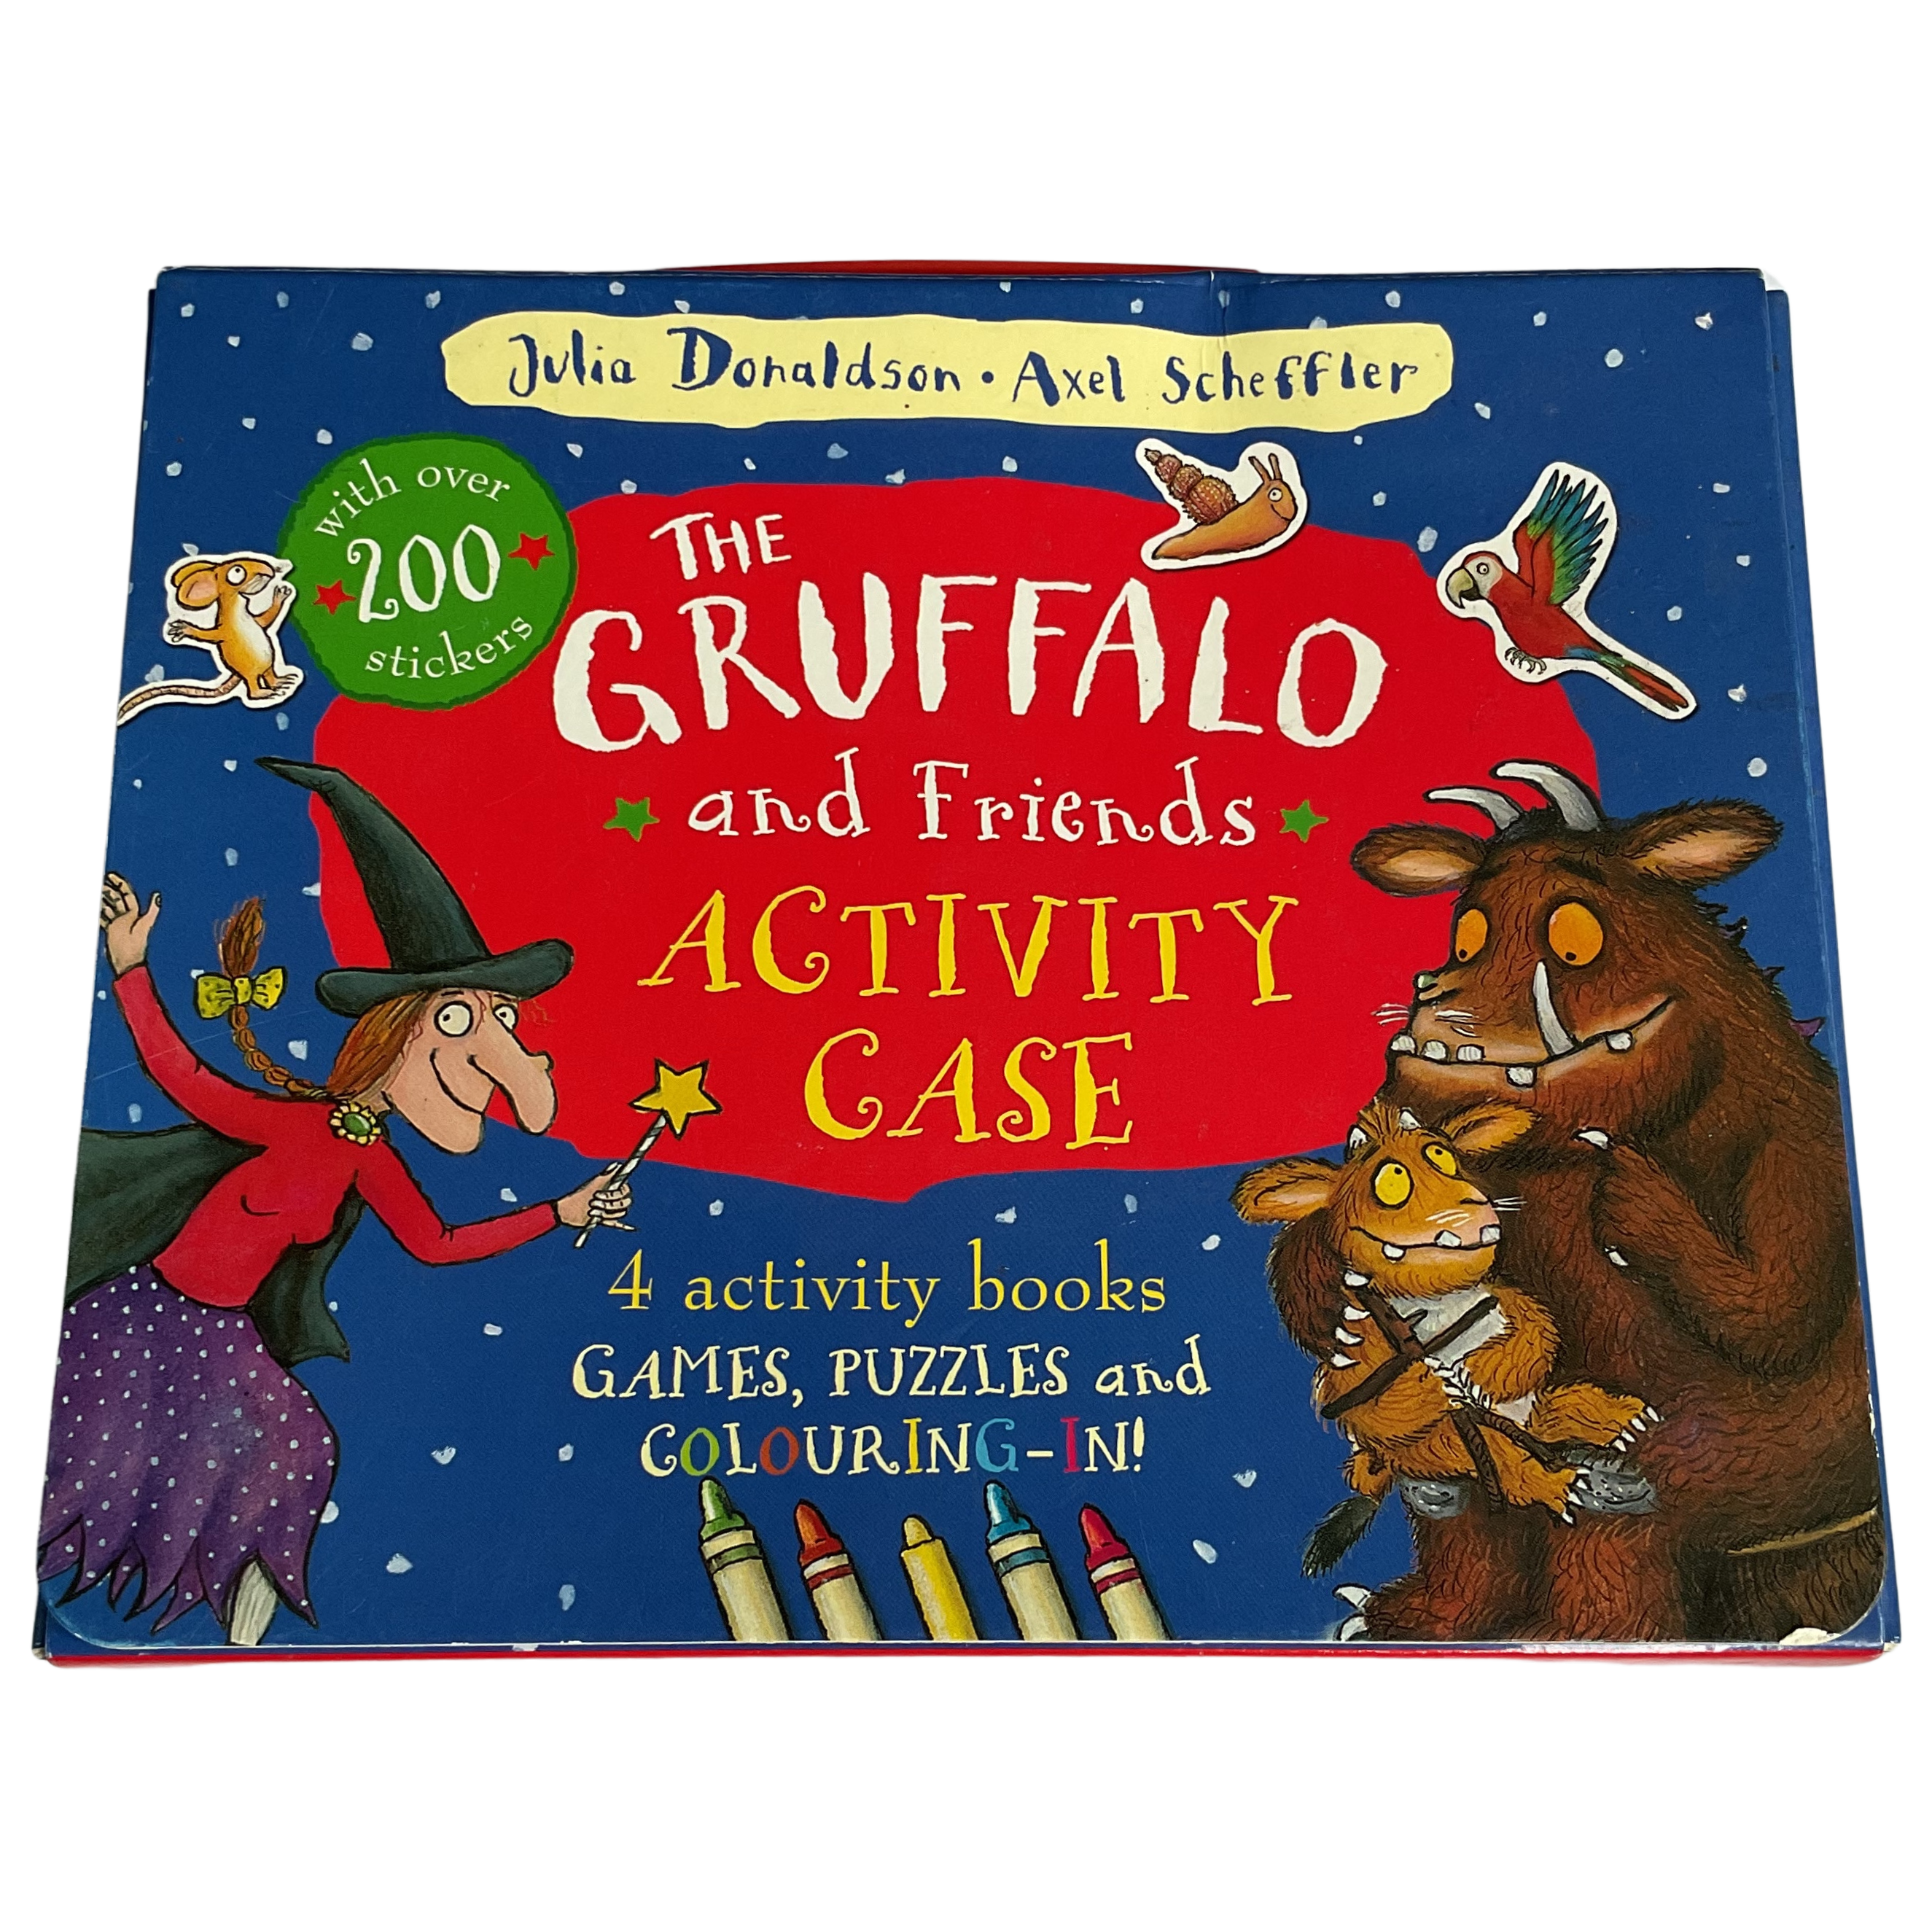 The Grufallo and Friends Activity Case